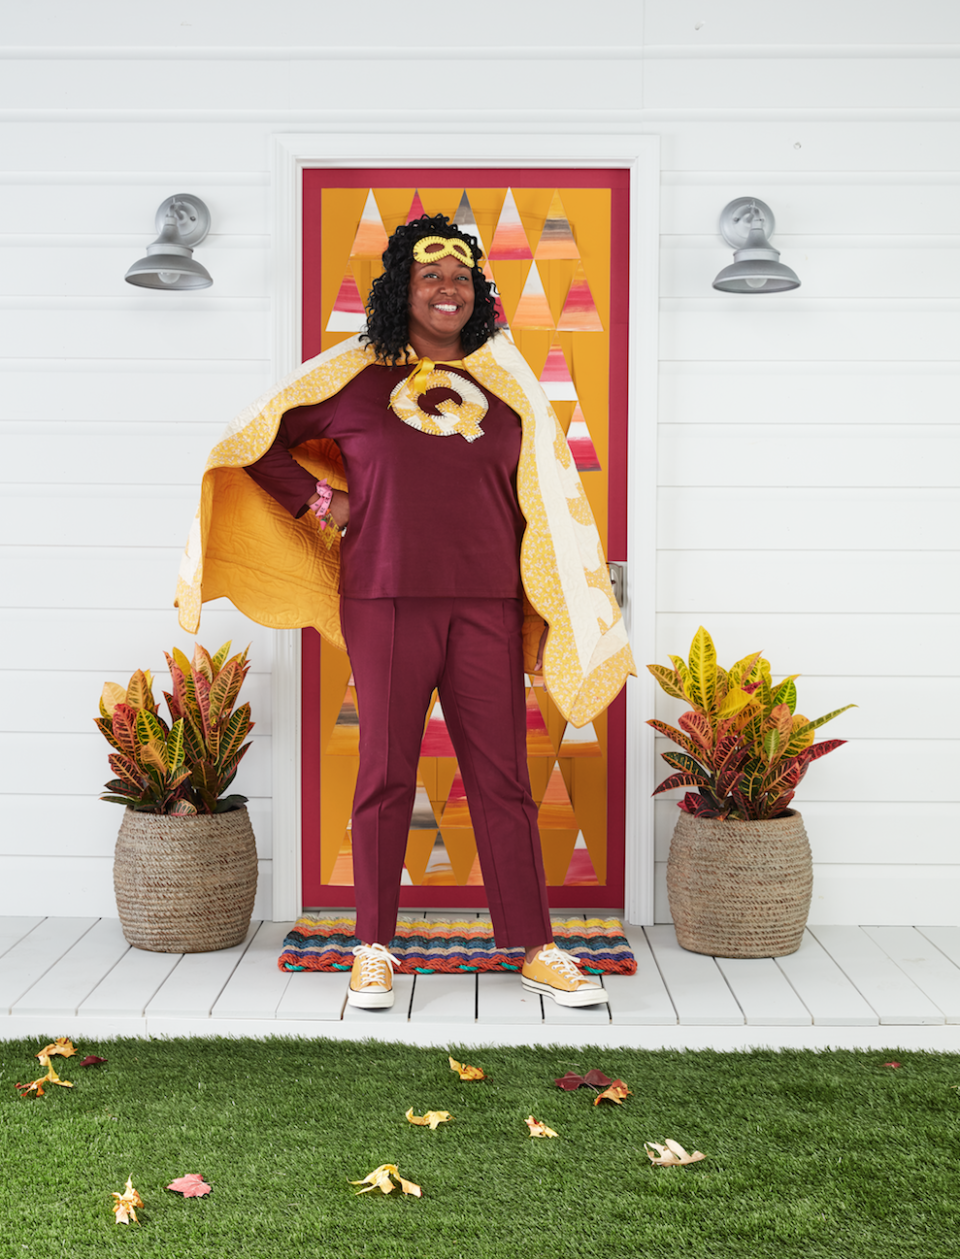 <p>When you're a mom, you're already a superhero. However, if you love quilting, become the super quilter for Halloween!</p><p><strong>Make the Costume: </strong>Cut a quilt into a trapezoid shape; sew a corresponding color bias tape around the edges to finish. At the top corners of the trapezoid, sew a corresponding color ribbon for ties. Use a scrap of the quilt to cut out an oversize letter "Q" and blanket stitch it to the front of a T-shirt. Blanket stitch around the edges of a felt superhero mask. Round out the look with a tailor tape measure bracelet adorned with sewing charms. Glue a metal thimble to a silver ring blank to create a superpower ring.</p><p><a class="link " href="https://www.amazon.com/flic-flac-inches-Assorted-Fabric-Patchwork/dp/B01GCRXBVE/?tag=syn-yahoo-20&ascsubtag=%5Bartid%7C10050.g.28181767%5Bsrc%7Cyahoo-us" rel="nofollow noopener" target="_blank" data-ylk="slk:SHOP FELT">SHOP FELT</a></p>